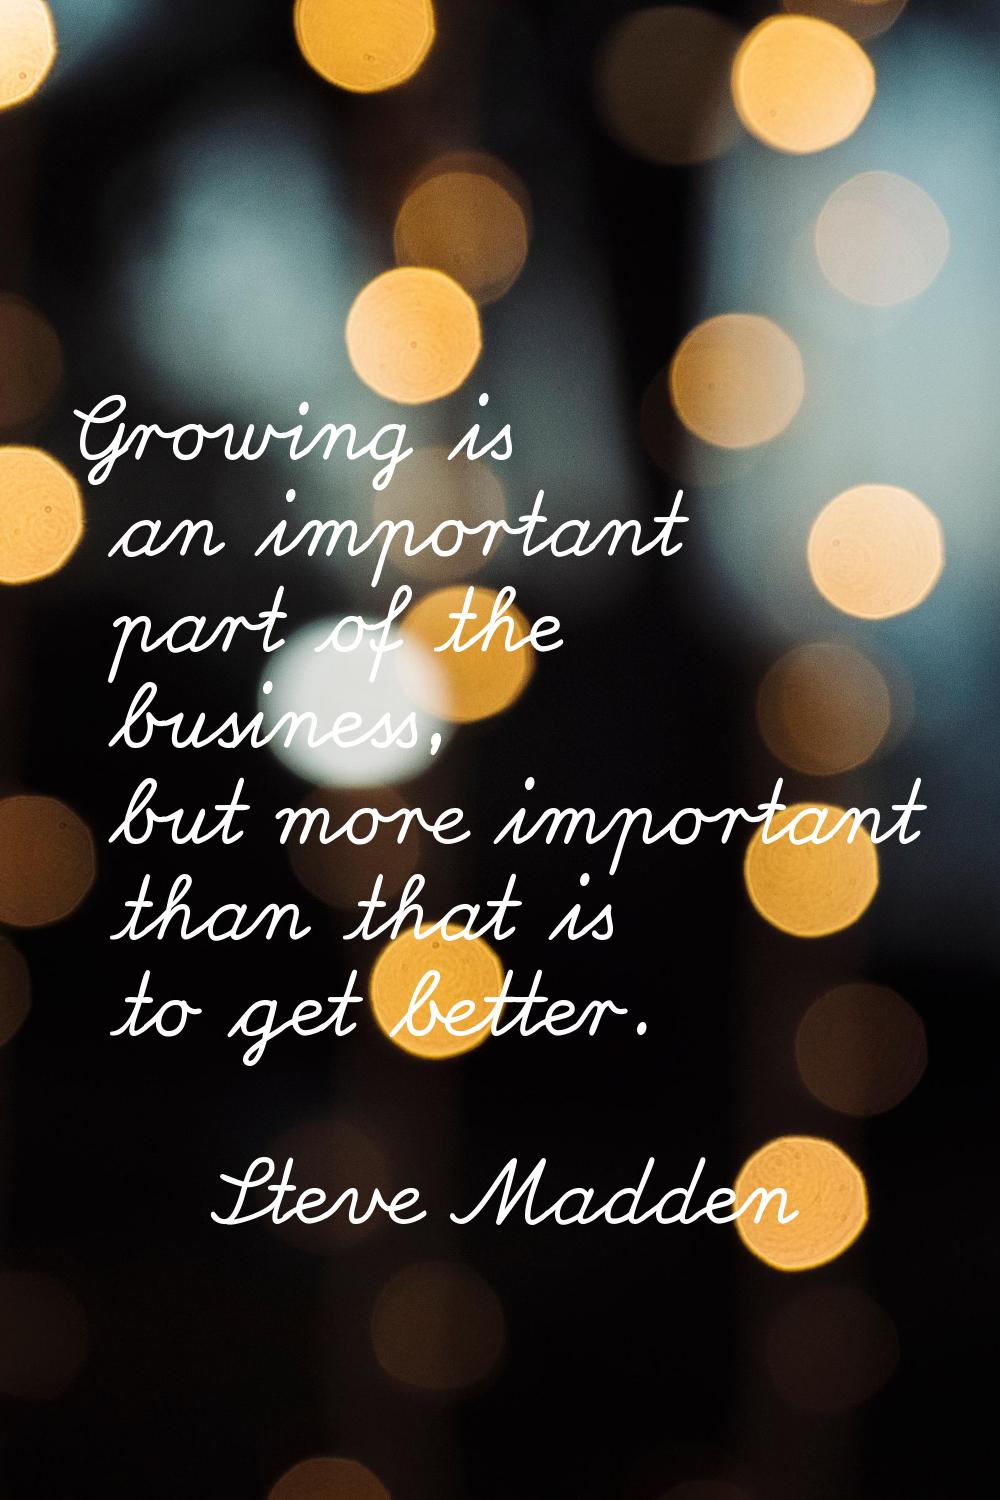 Growing is an important part of the business, but more important than that is to get better.